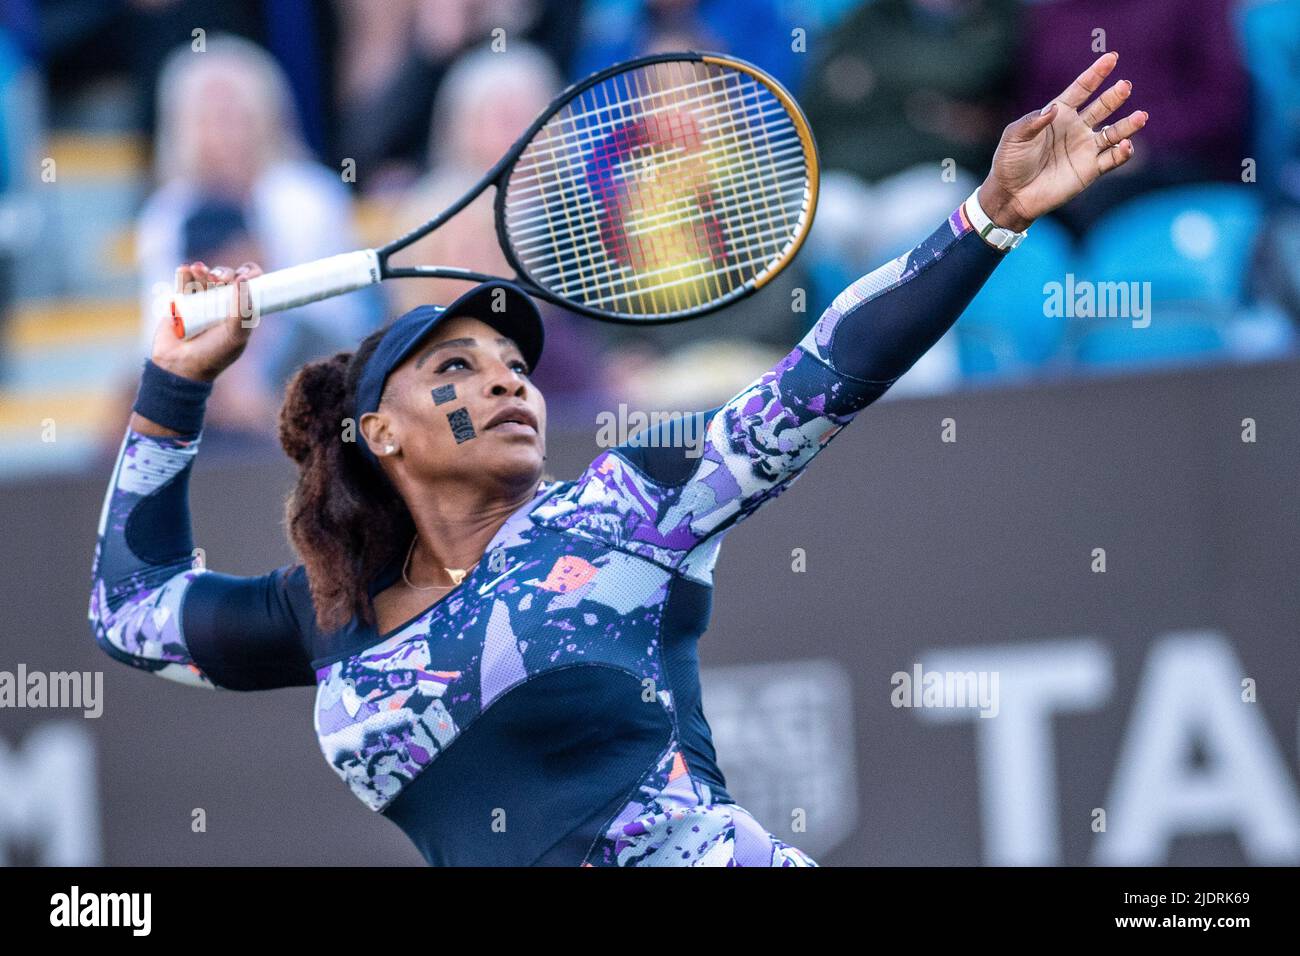 EASTBOURNE, ENGLAND - JUNE 22: Serena Williams of the United States during the Womens doubles quarter final playing alongside Ons Jabeur of Tunisia against Shuko Aoyama of Japan and Hao-Ching Chan of Chinese Taipei on Day Five of Rothesay International Eastbourne at Devonshire Park on June 22, 2022 in Eastbourne, England. (Photo by Sebastian Frej) Credit: Sebo47/Alamy Live News Stock Photo